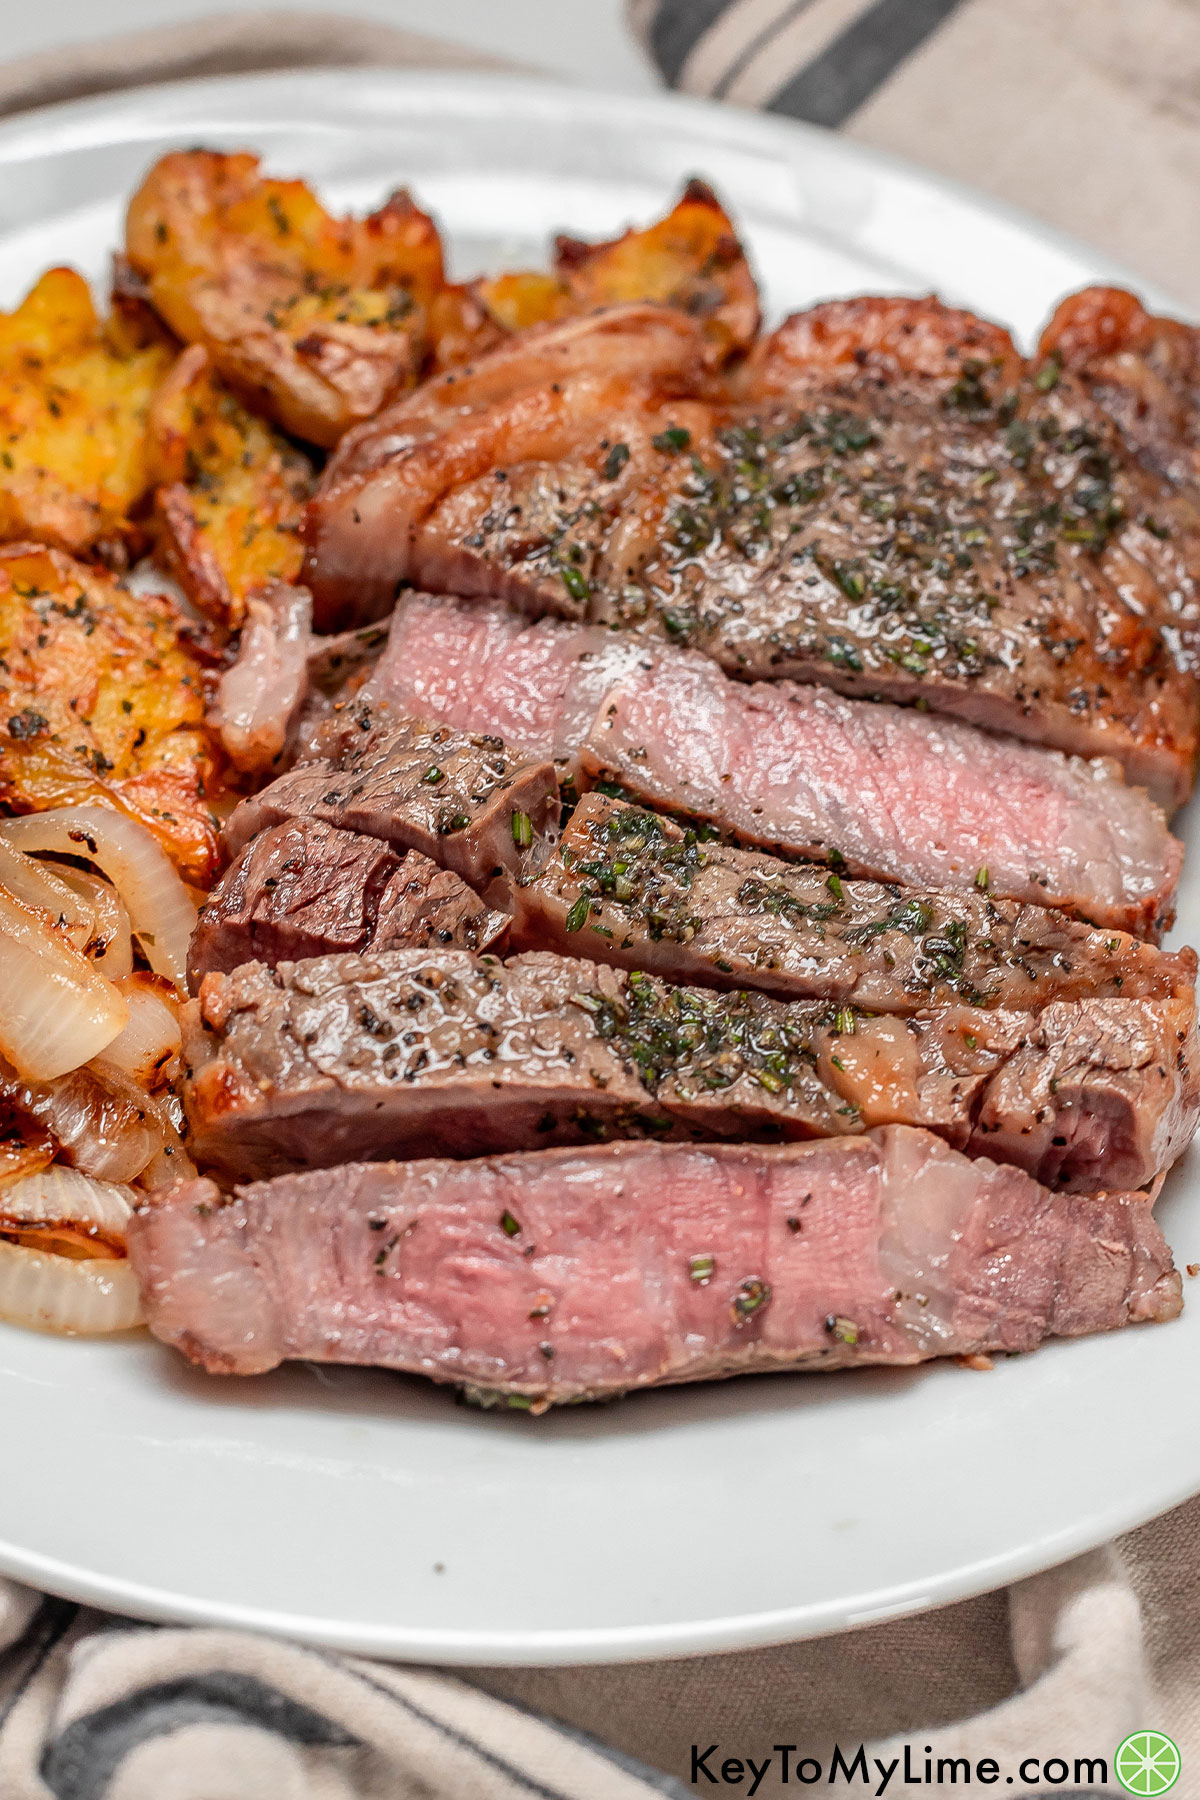 A side image of a sliced ribeye covered in herb butter next to a serving of potatoes.